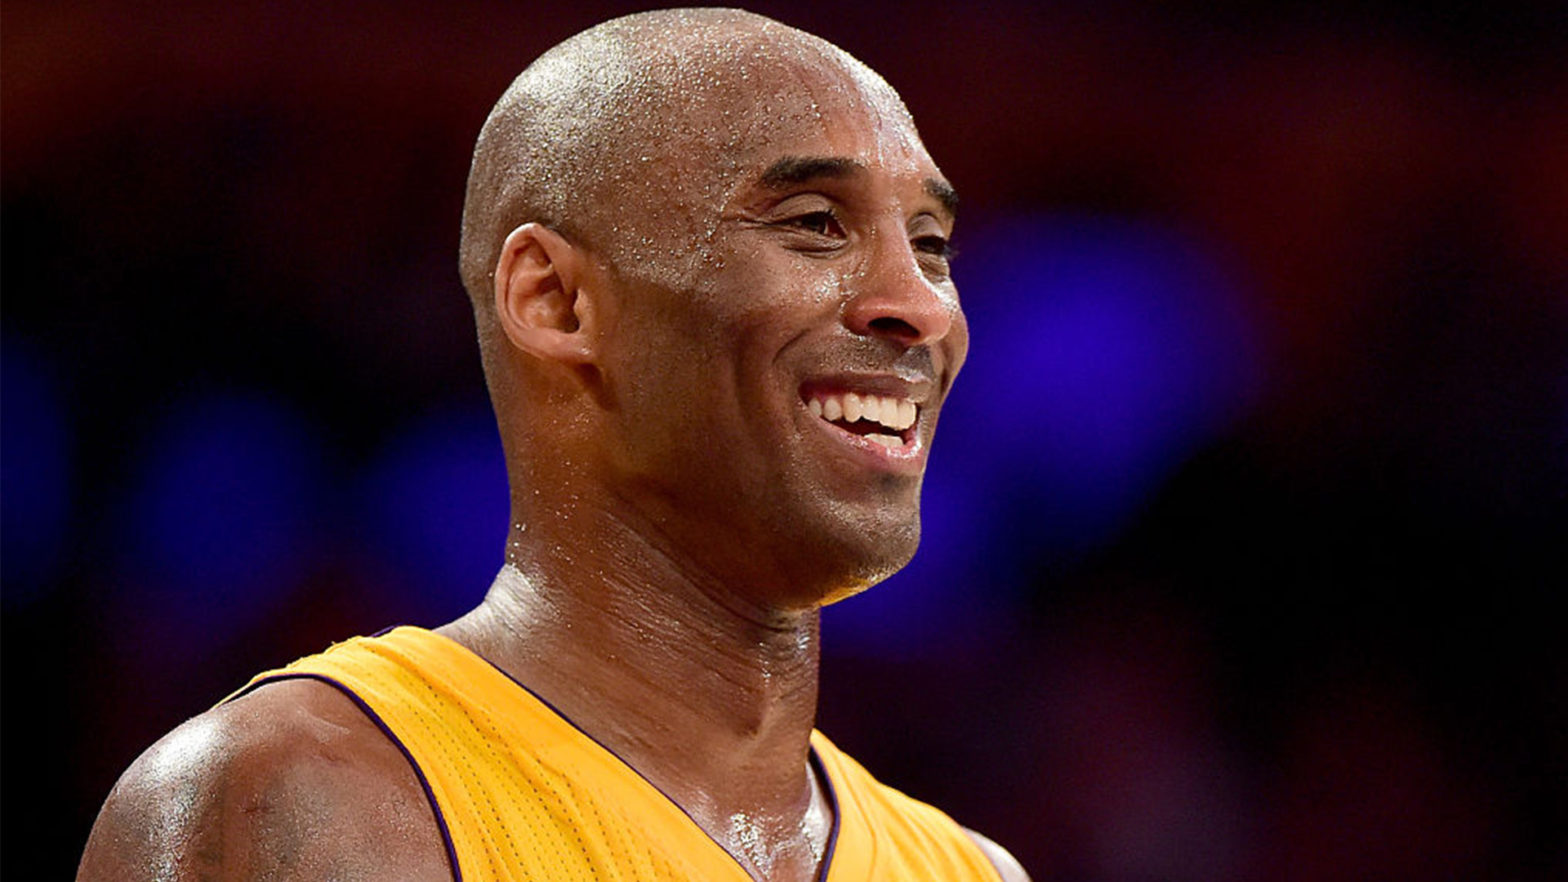 Bidder Offers $800K For A Piece Of The Late Kobe Bryant's Final Game Floor